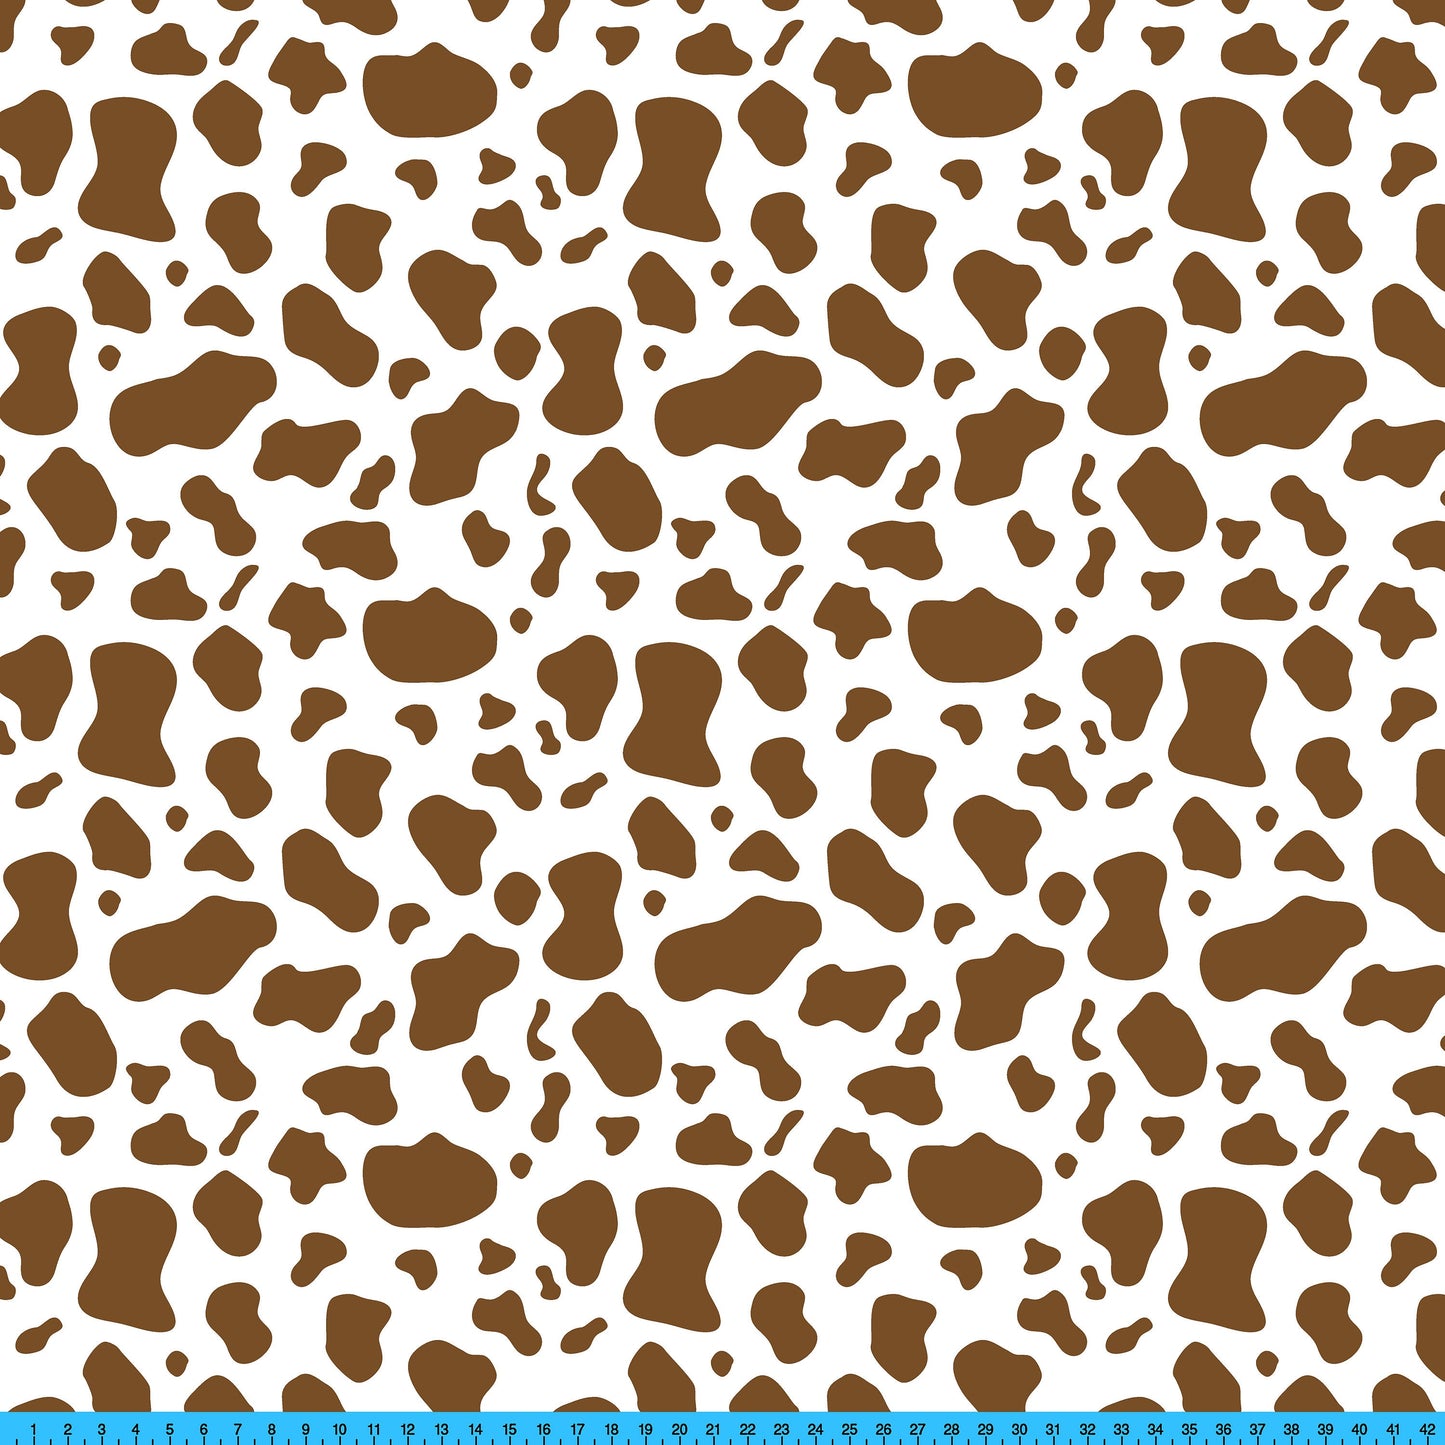 Cow Print with Brown Spots Fabric By The Yard